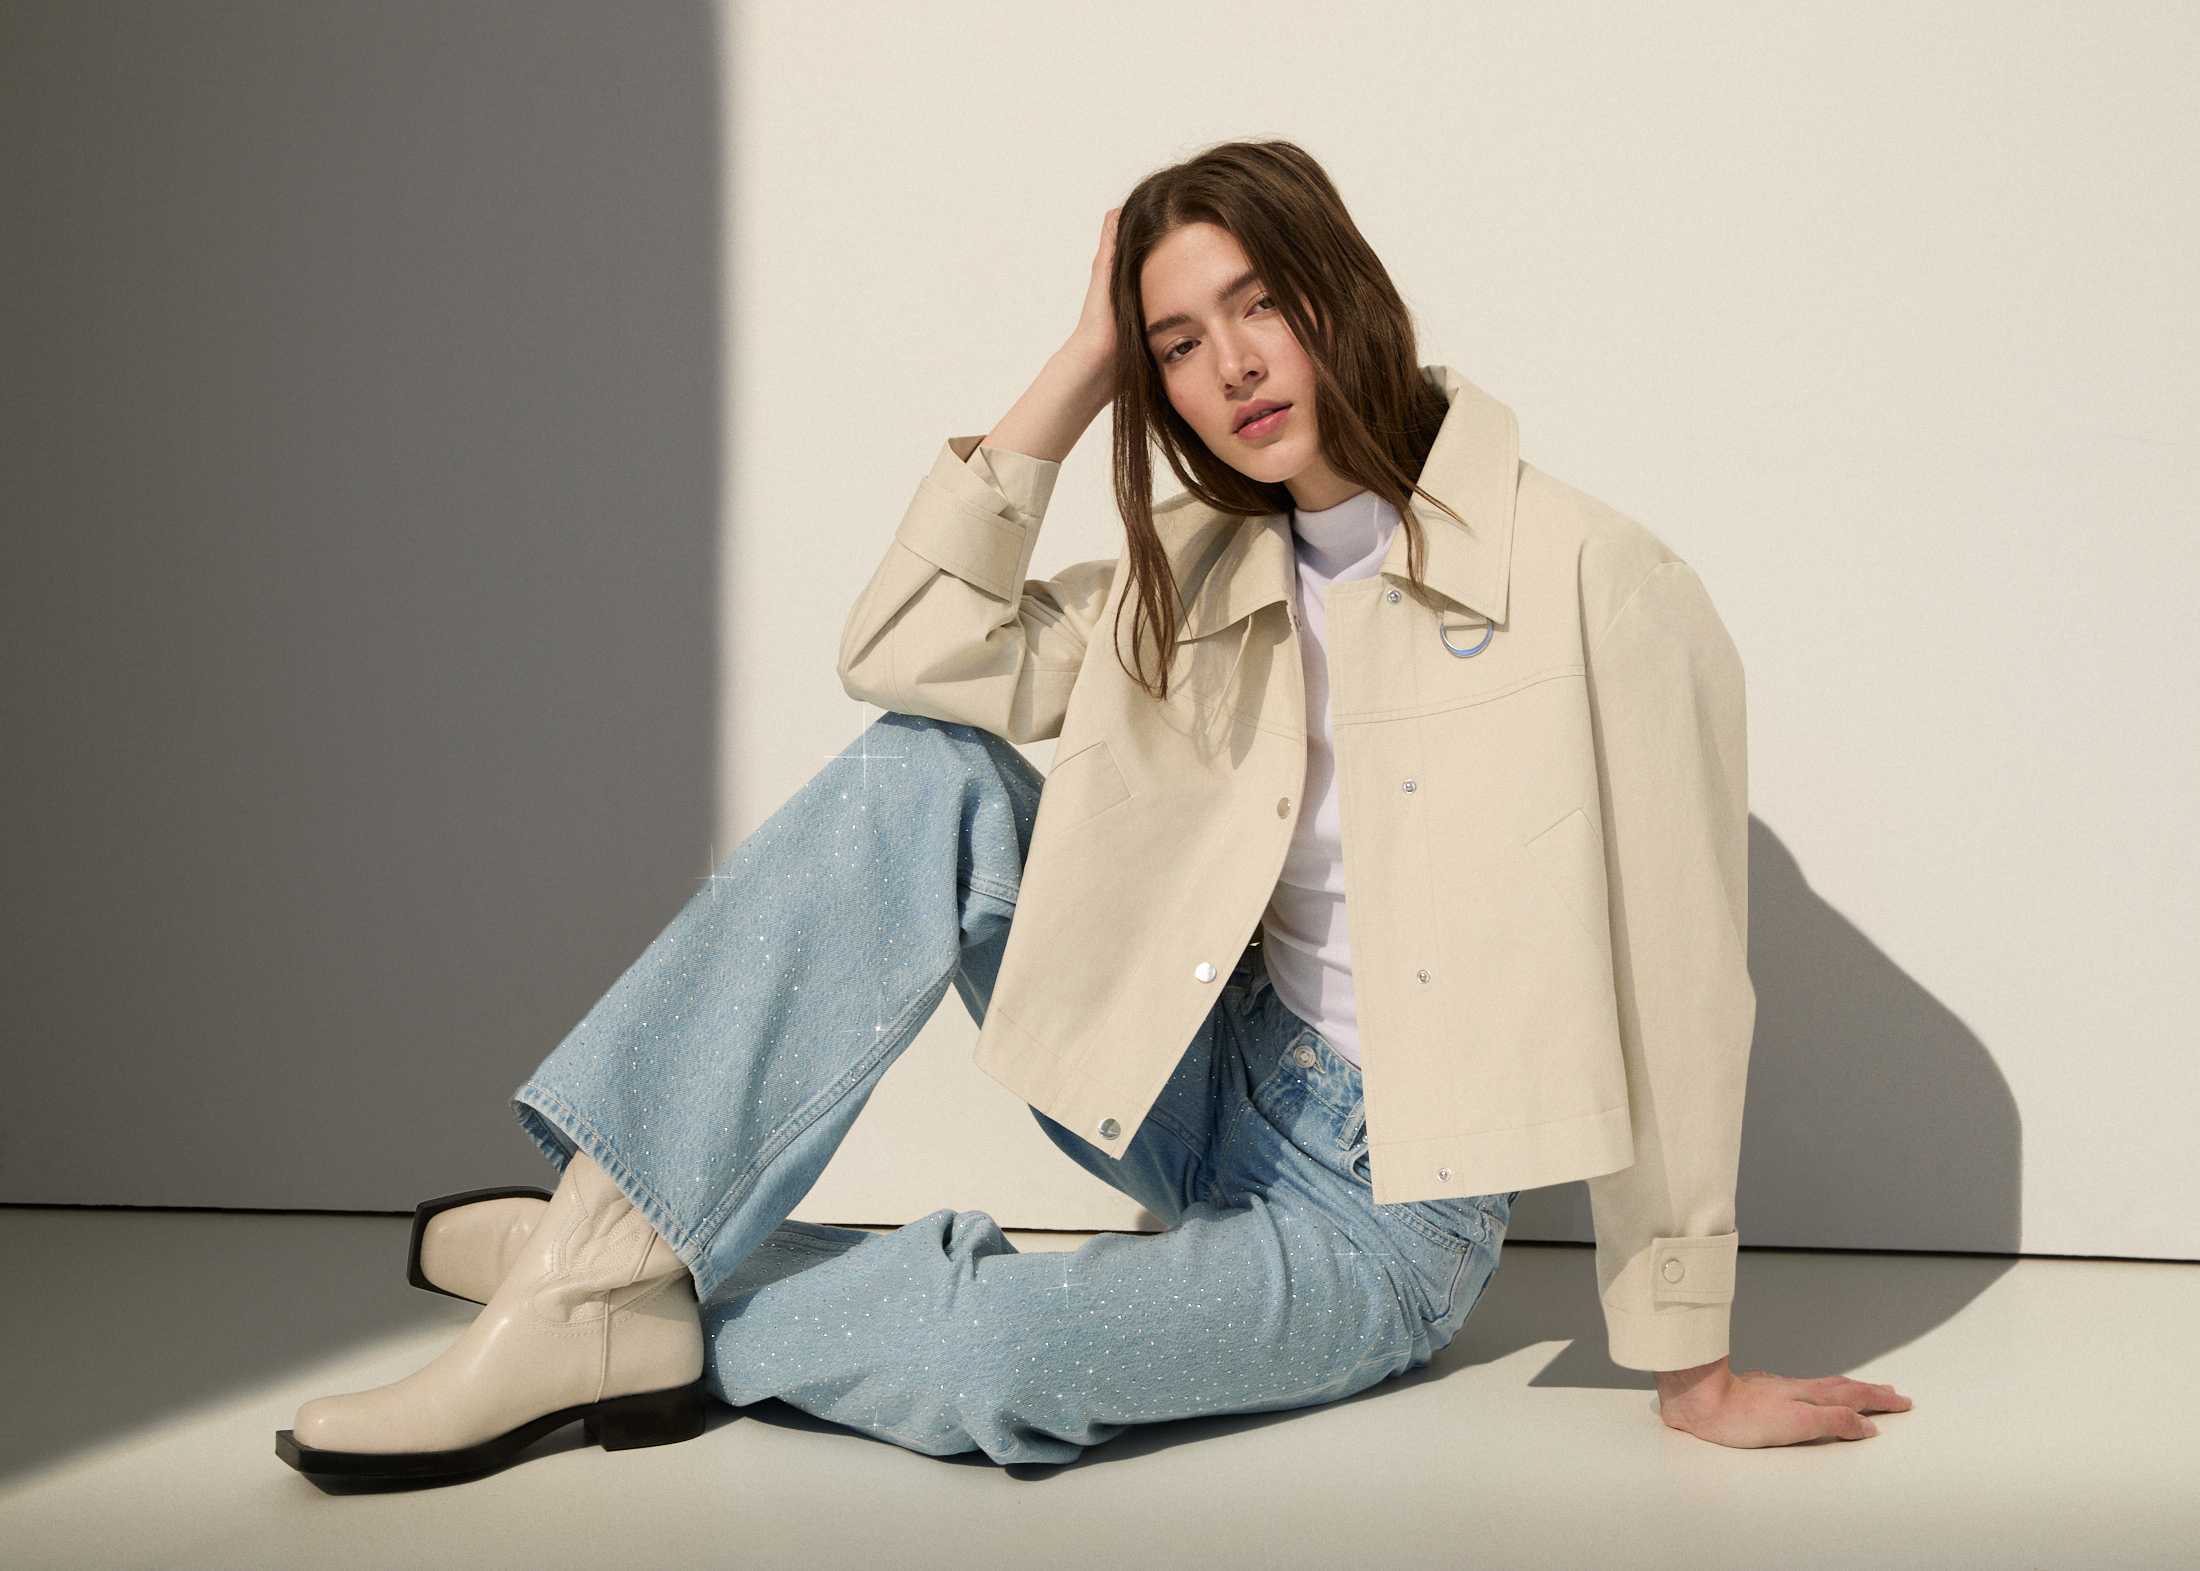 Stradivarius presents its spring jackets collection